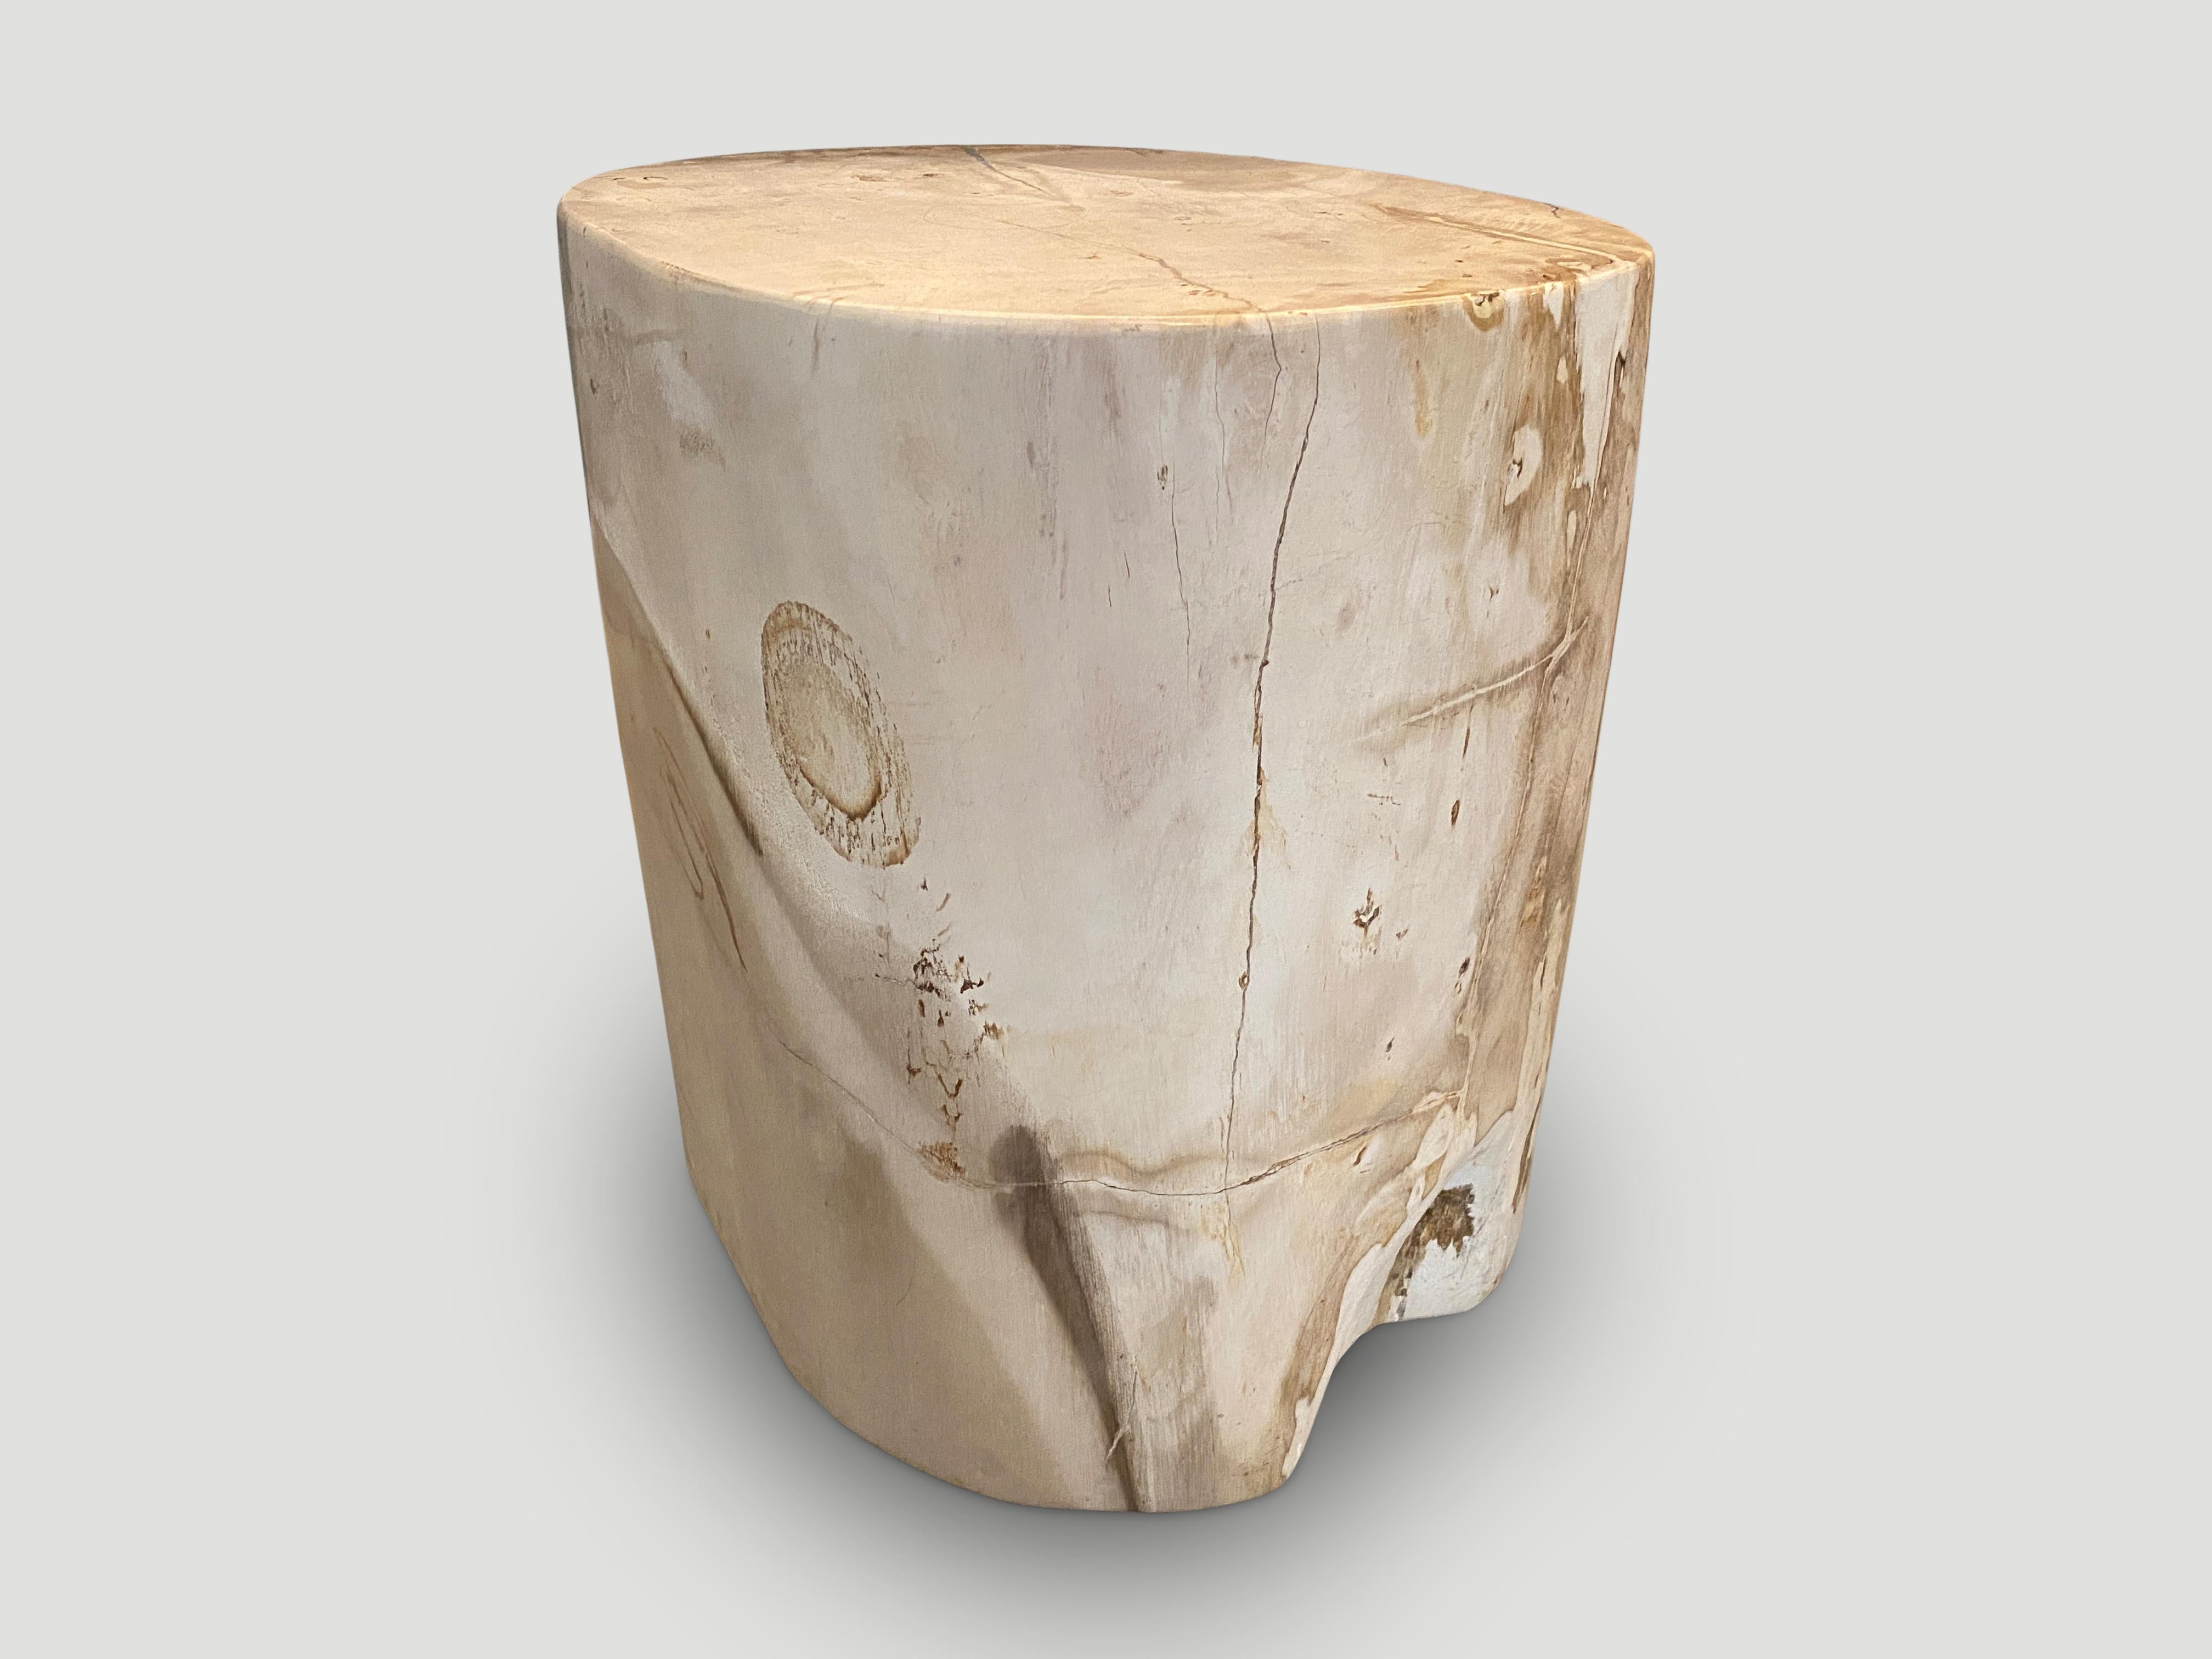 Beautiful rare neutral tones and markings on this large high quality petrified wood side table. It’s fascinating how Mother Nature produces these stunning 40 million year old petrified teak logs with such contrasting colors and natural patterns